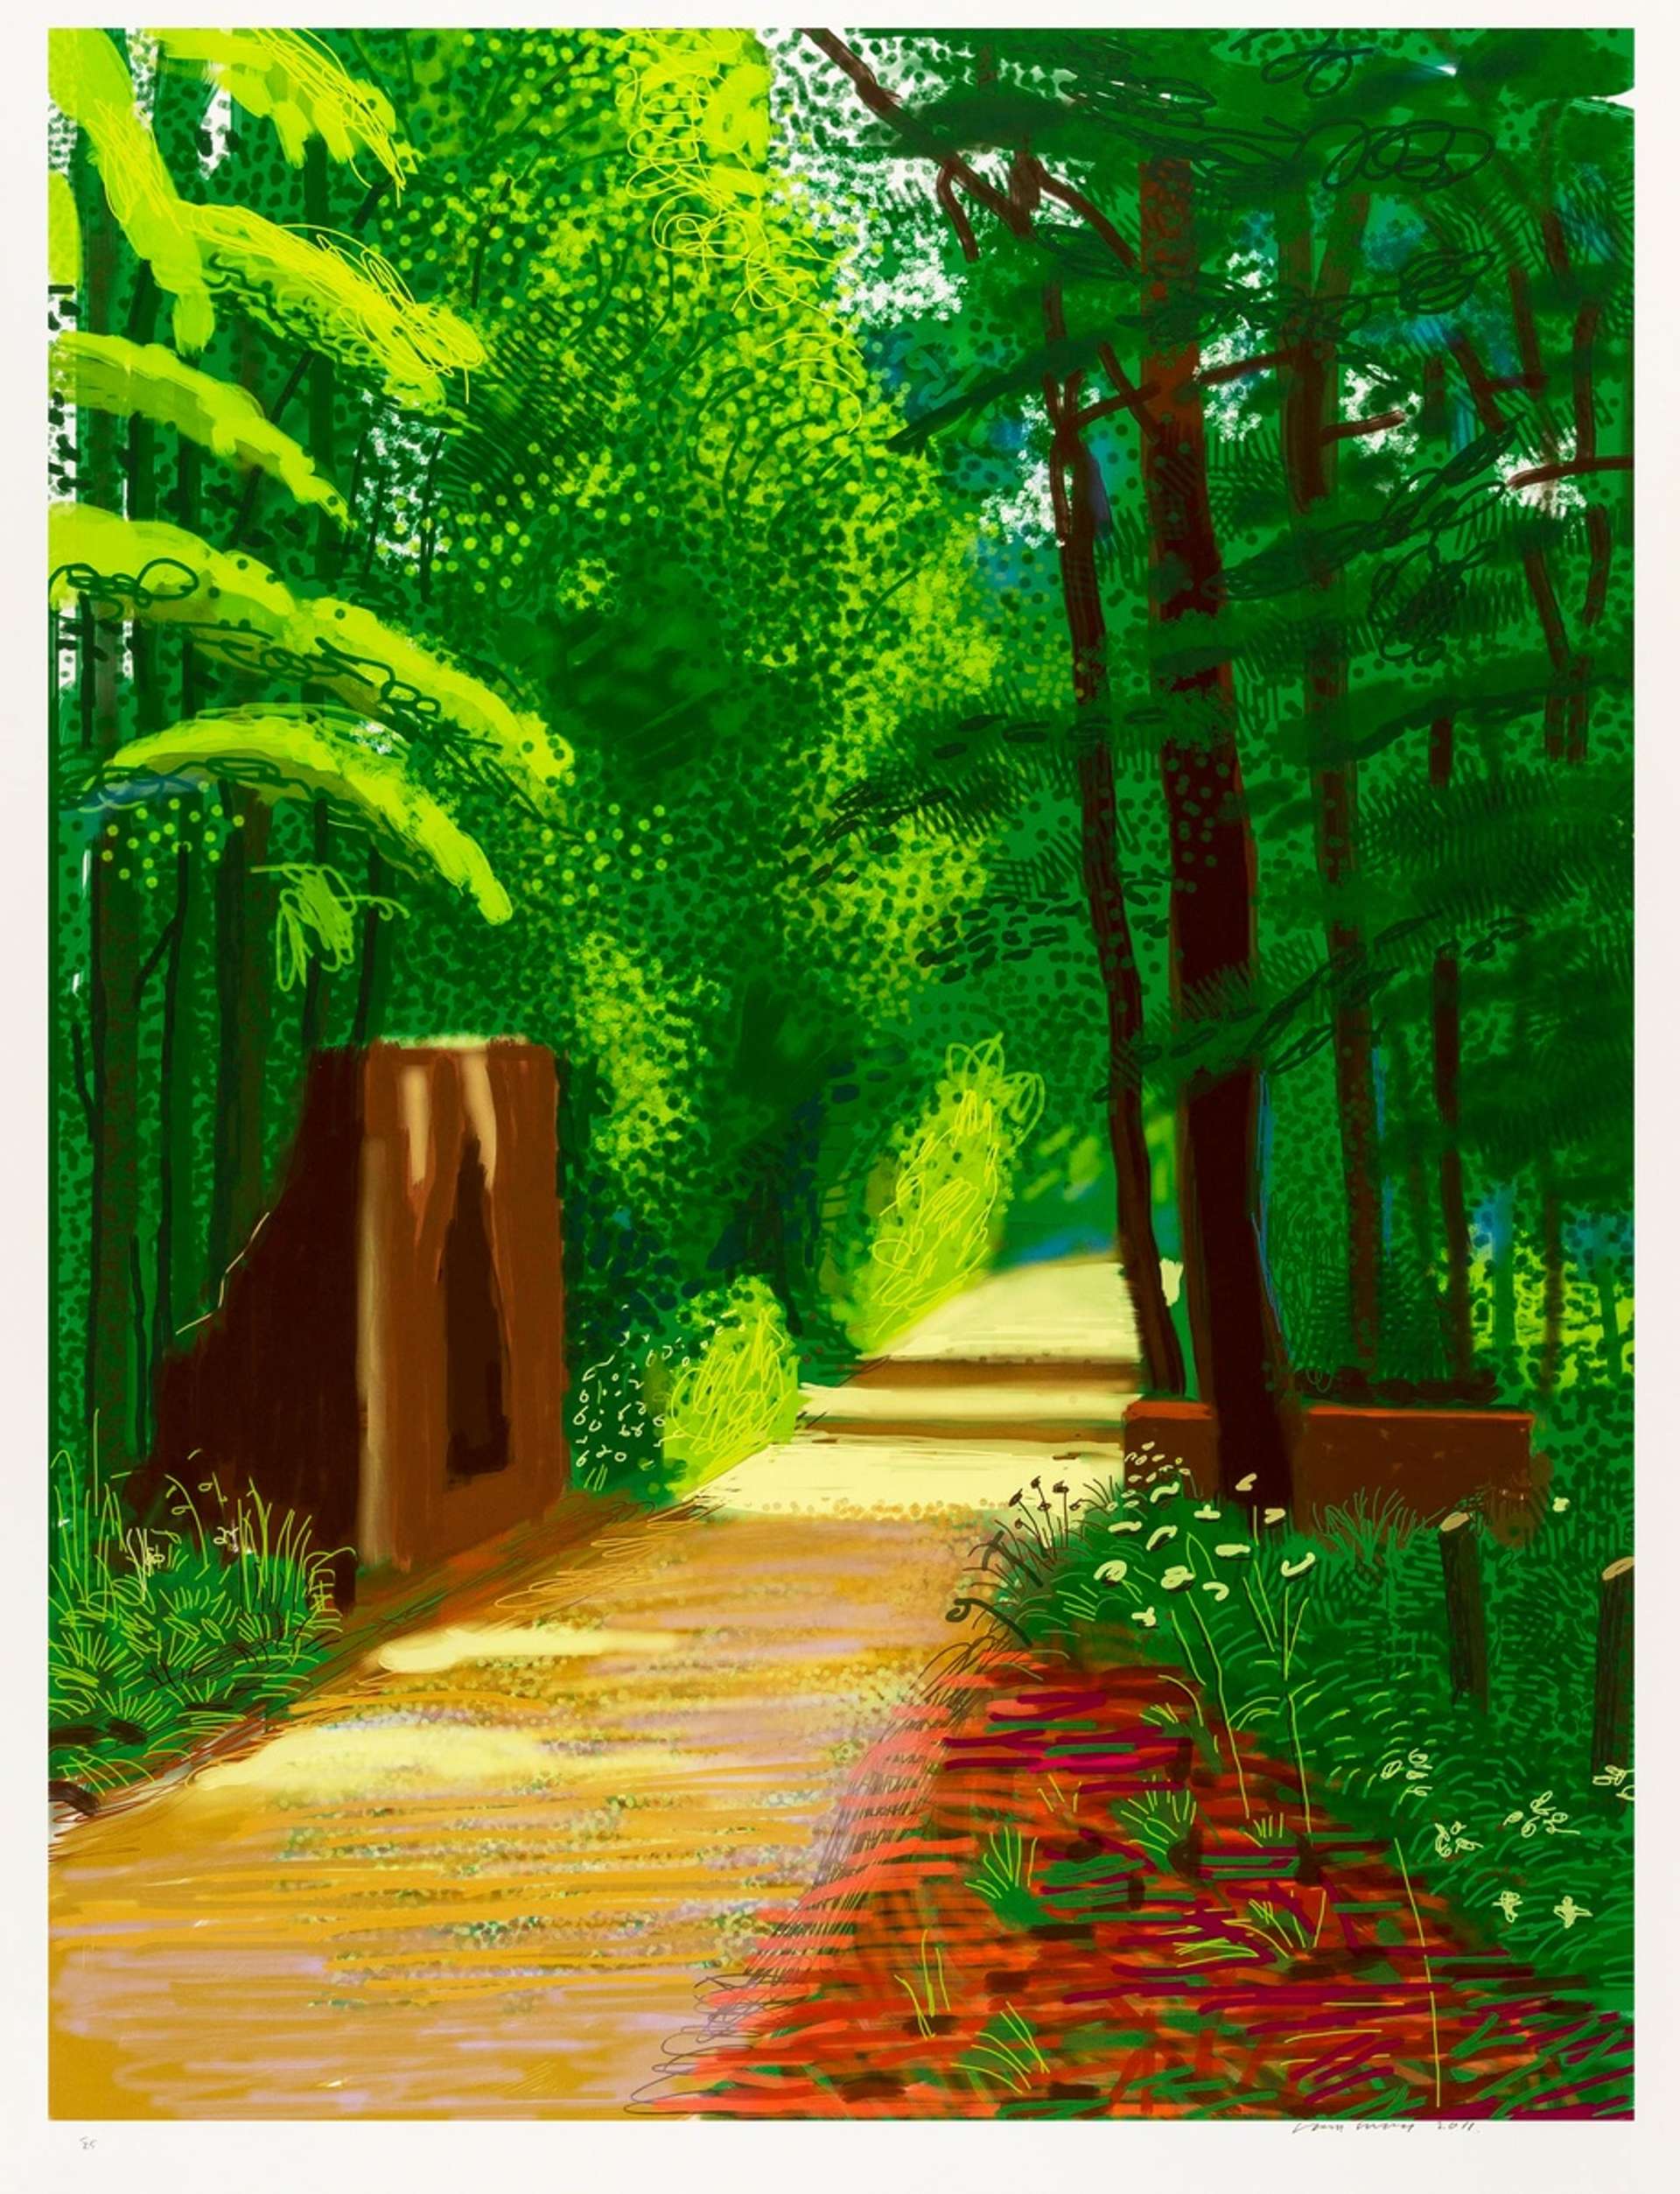 The Arrival Of Spring In Woldgate East Yorkshire 2nd June 2011 by David Hockney